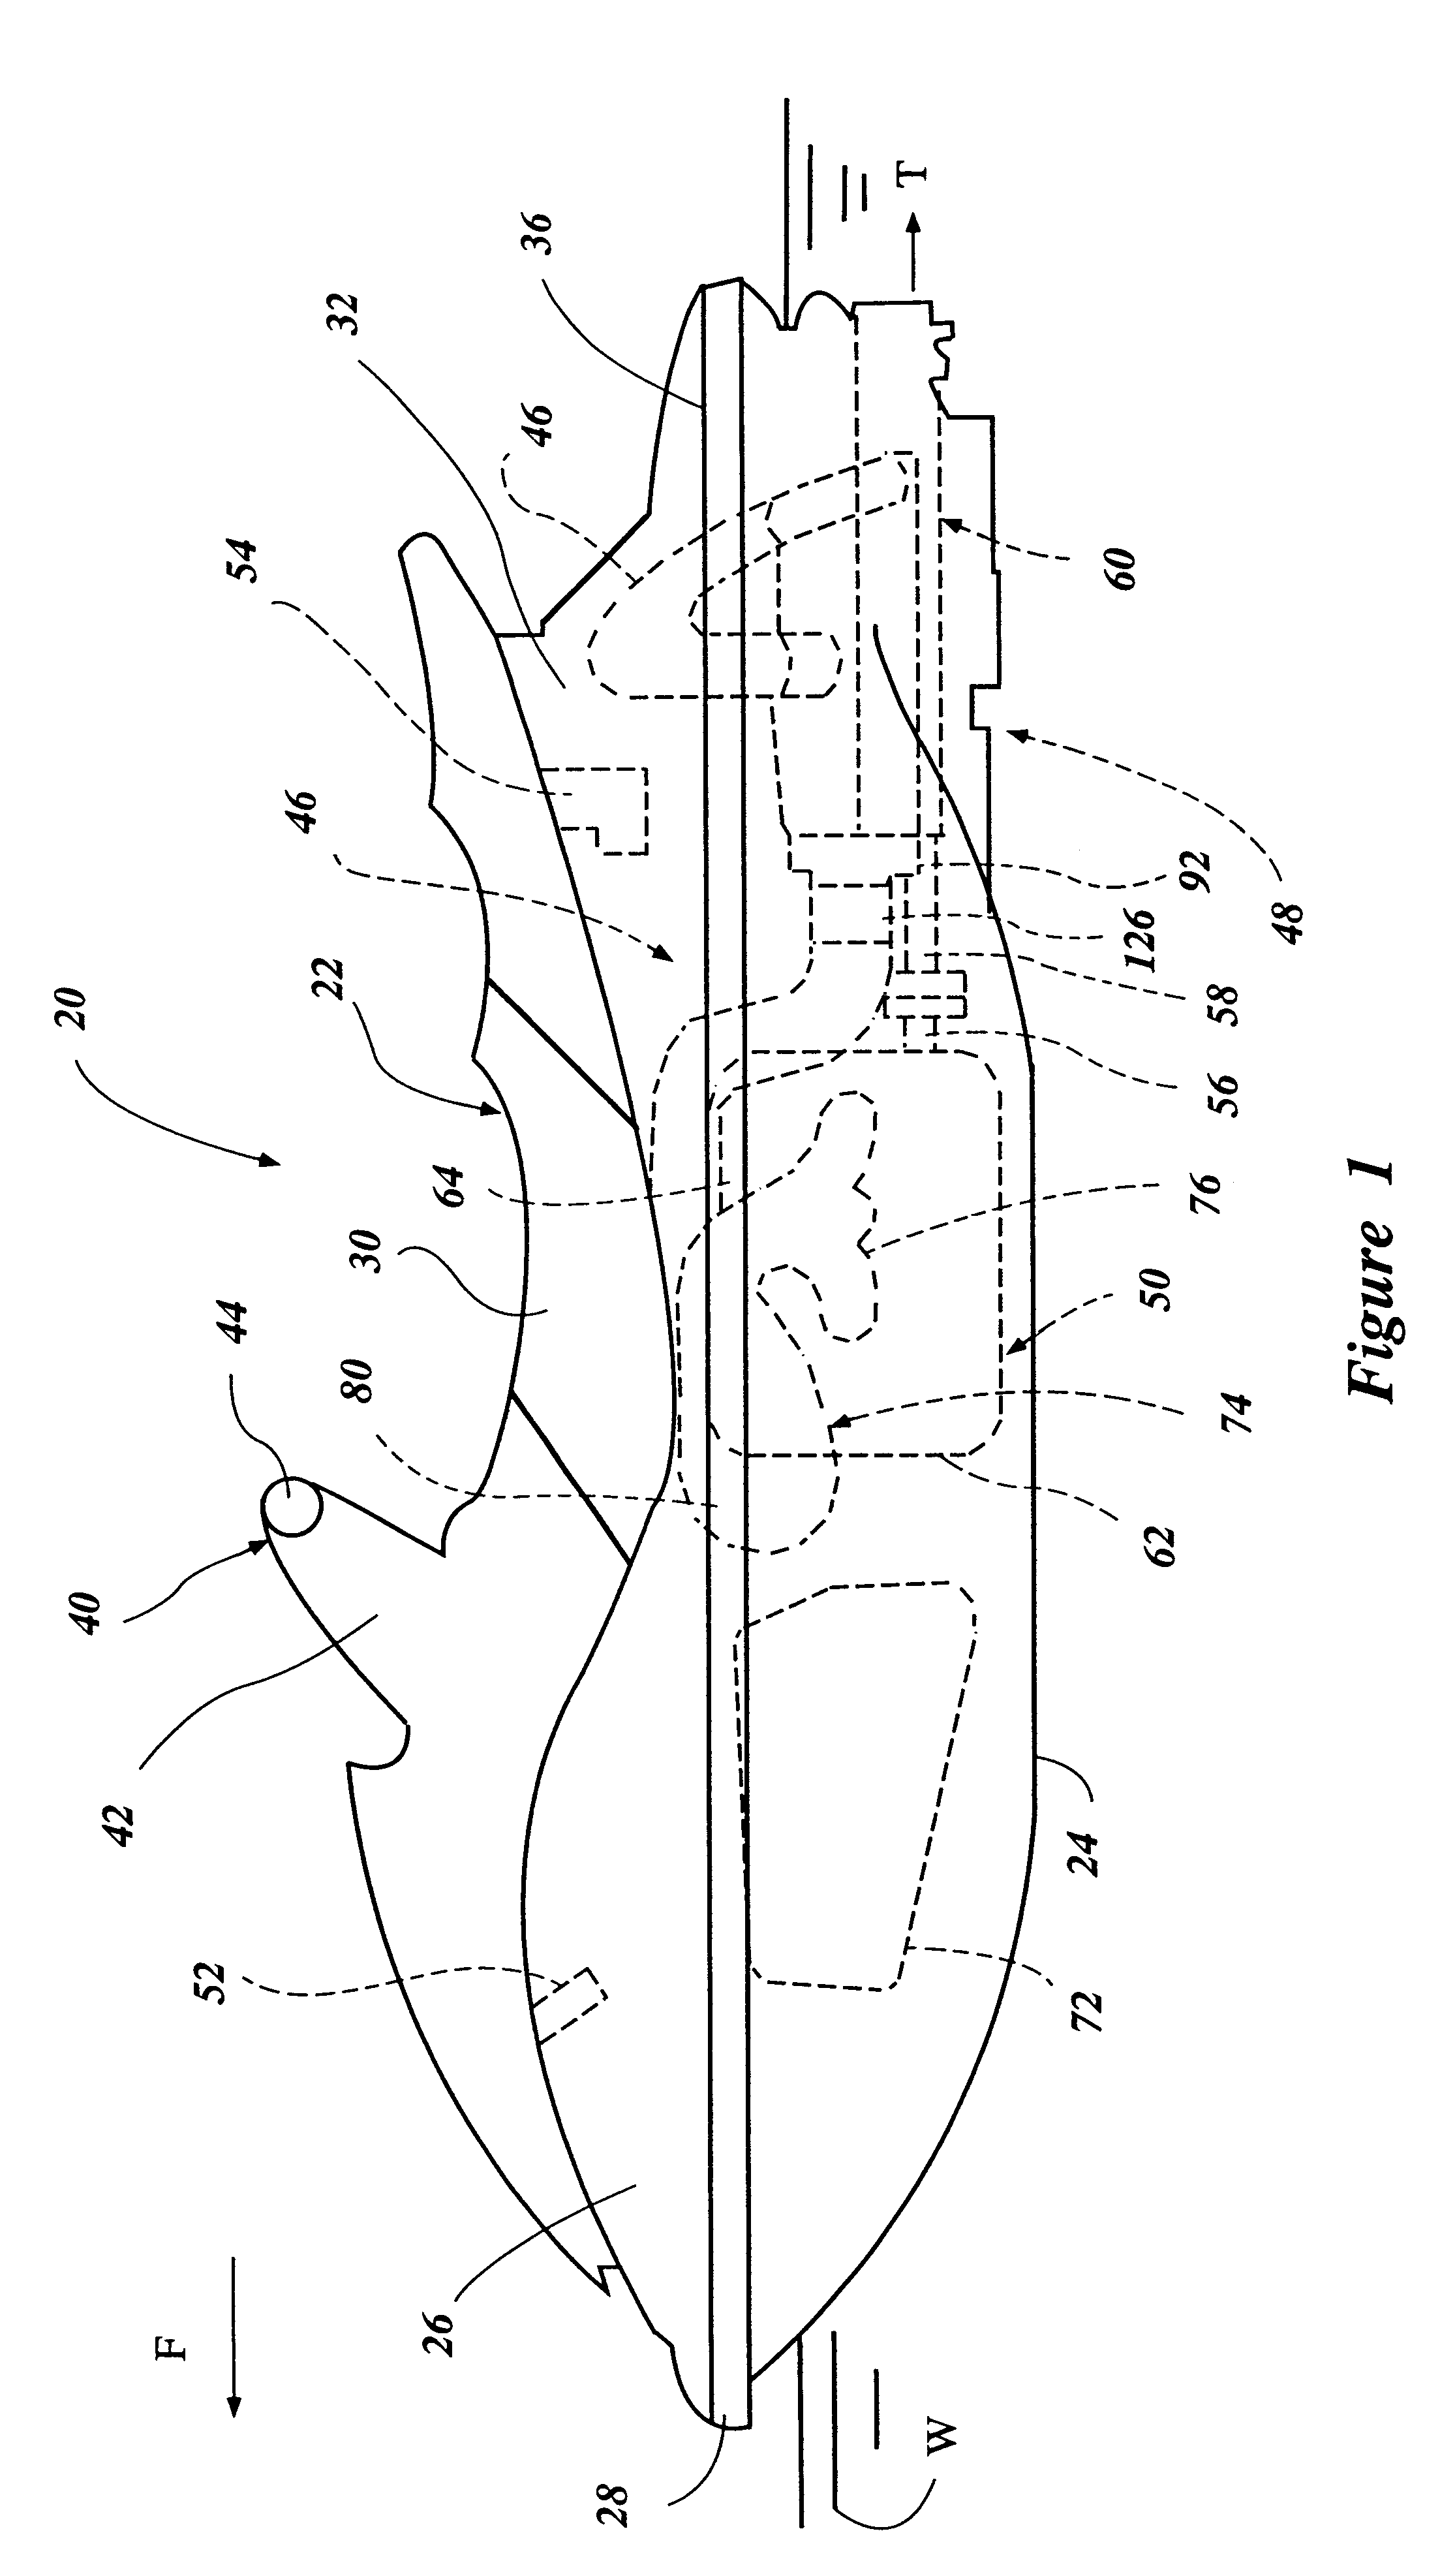 Exhaust and control for watercraft engine